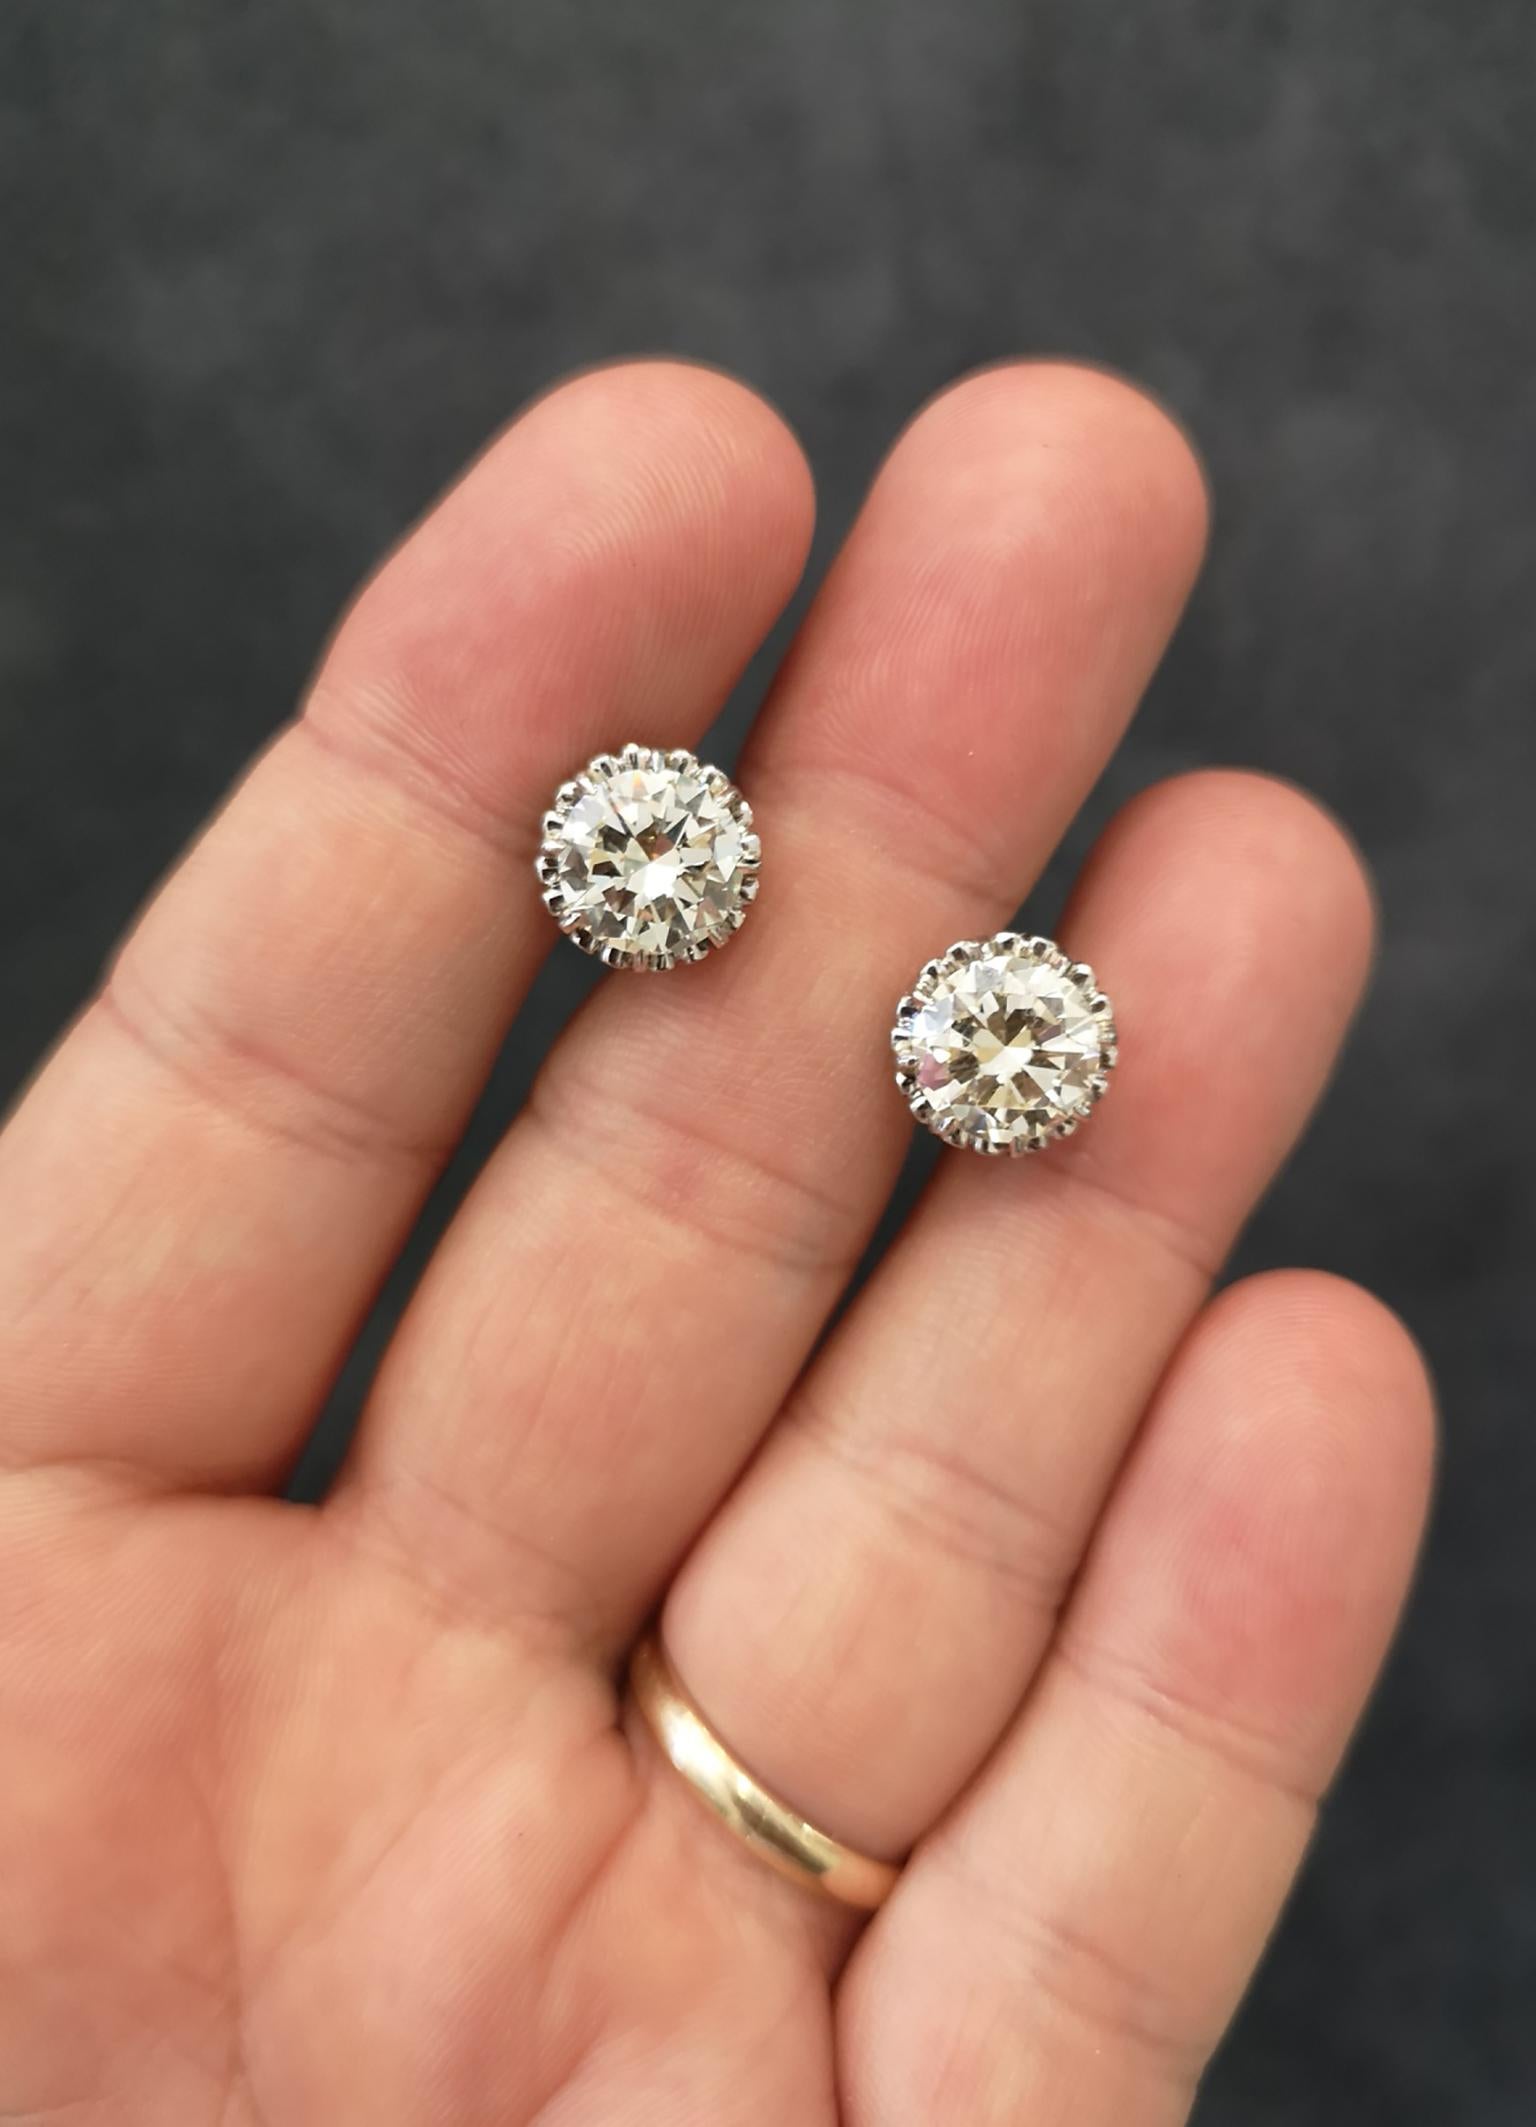 Astonishing pair of diamond ear studs. Exceptionally well matched brilliant-cut diamonds, each approximately 3.00 carats, K-L colour, VVS clarity. Mounted in eight, pointed platinum claws, framed with a fancy scalloped platinum border. Posts with